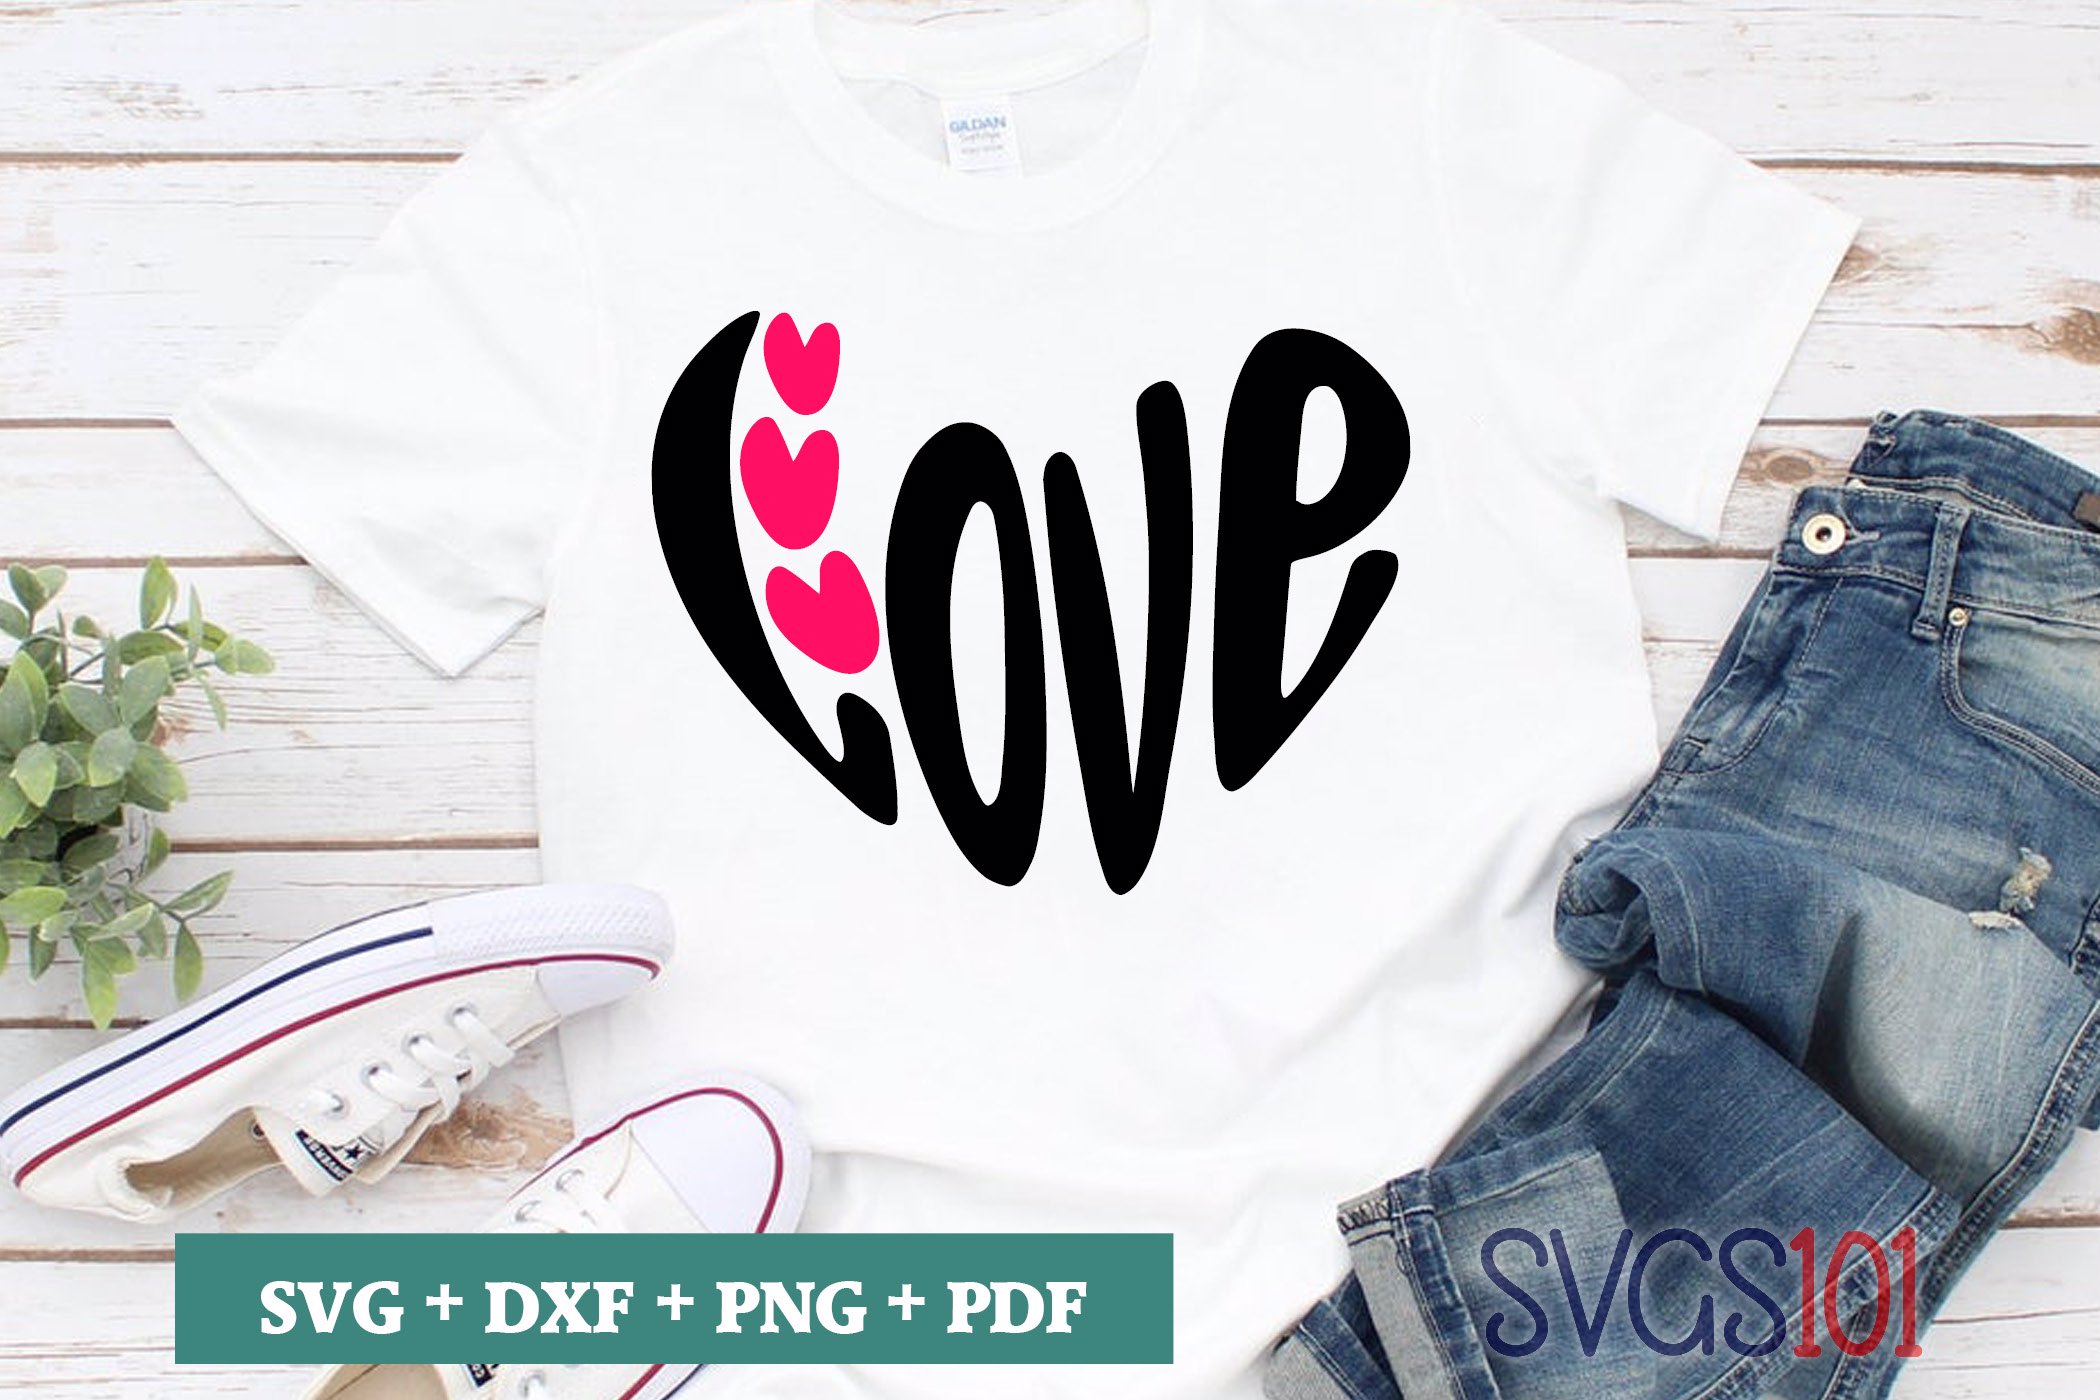 Love SVG Cuttable file - DXF, EPS, PNG, PDF | SVG Cutting File